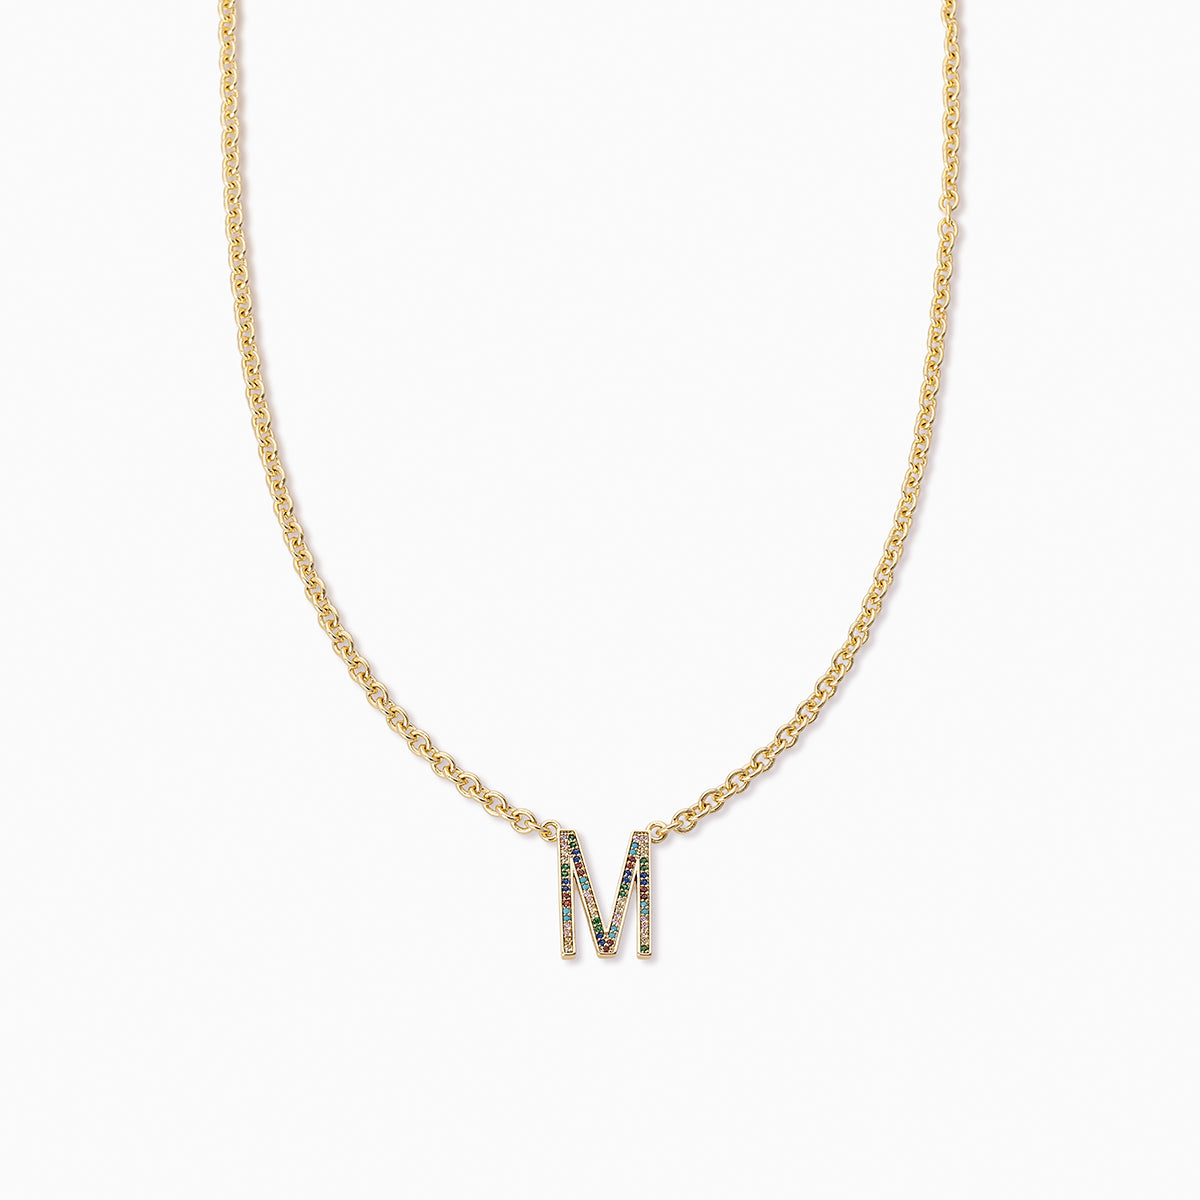 Know Me Necklace | Gold M | Product Image | Uncommon James